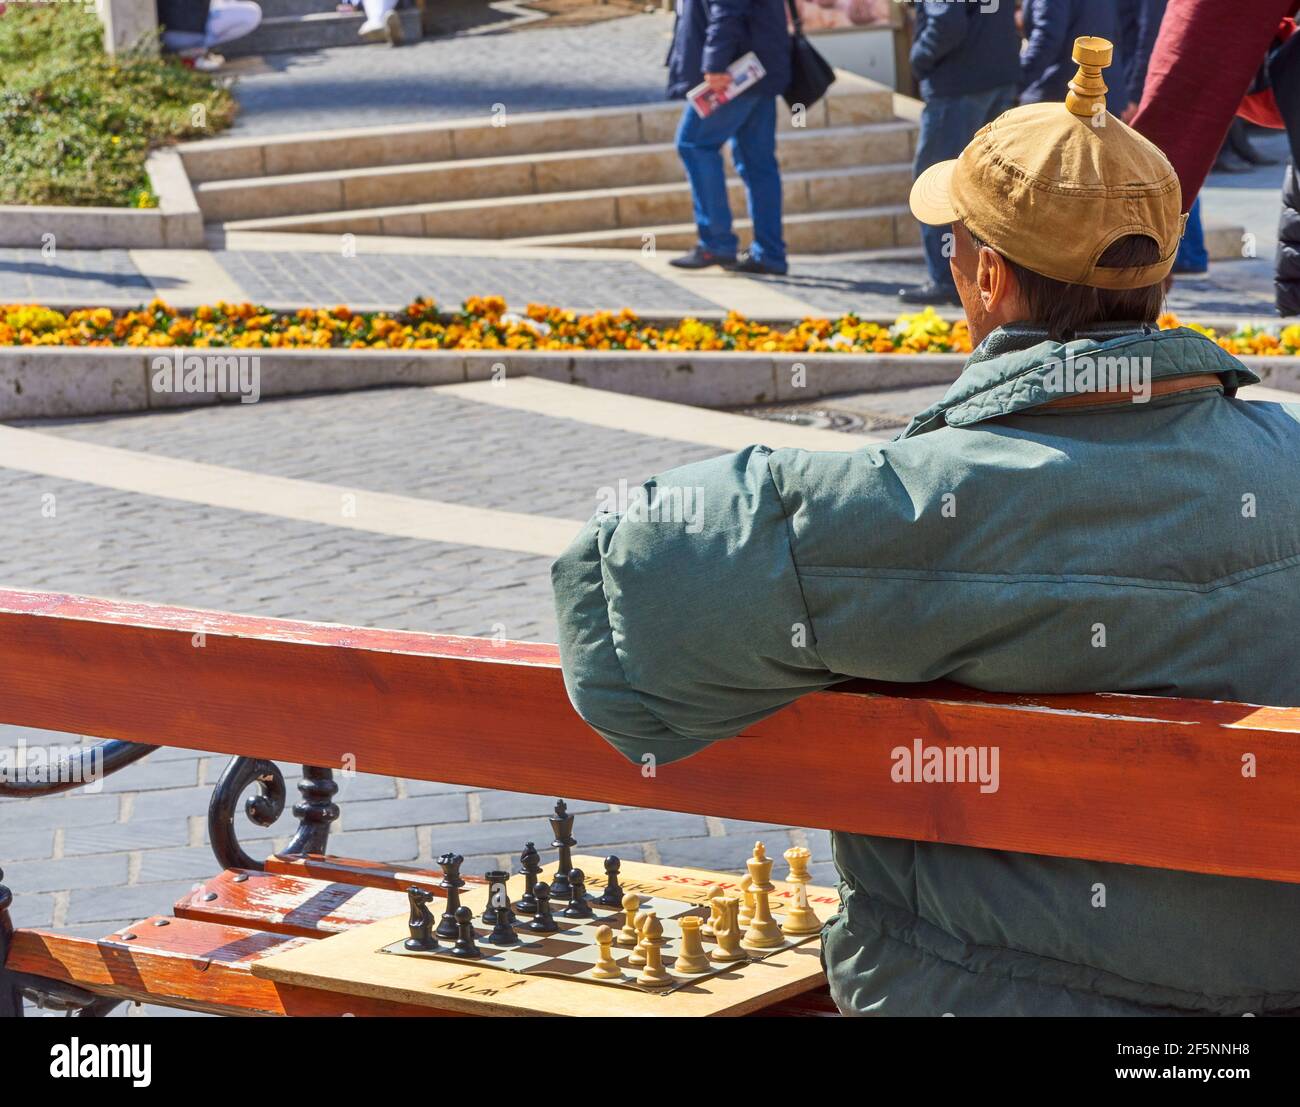 Playing chess outdoors Stock Photo